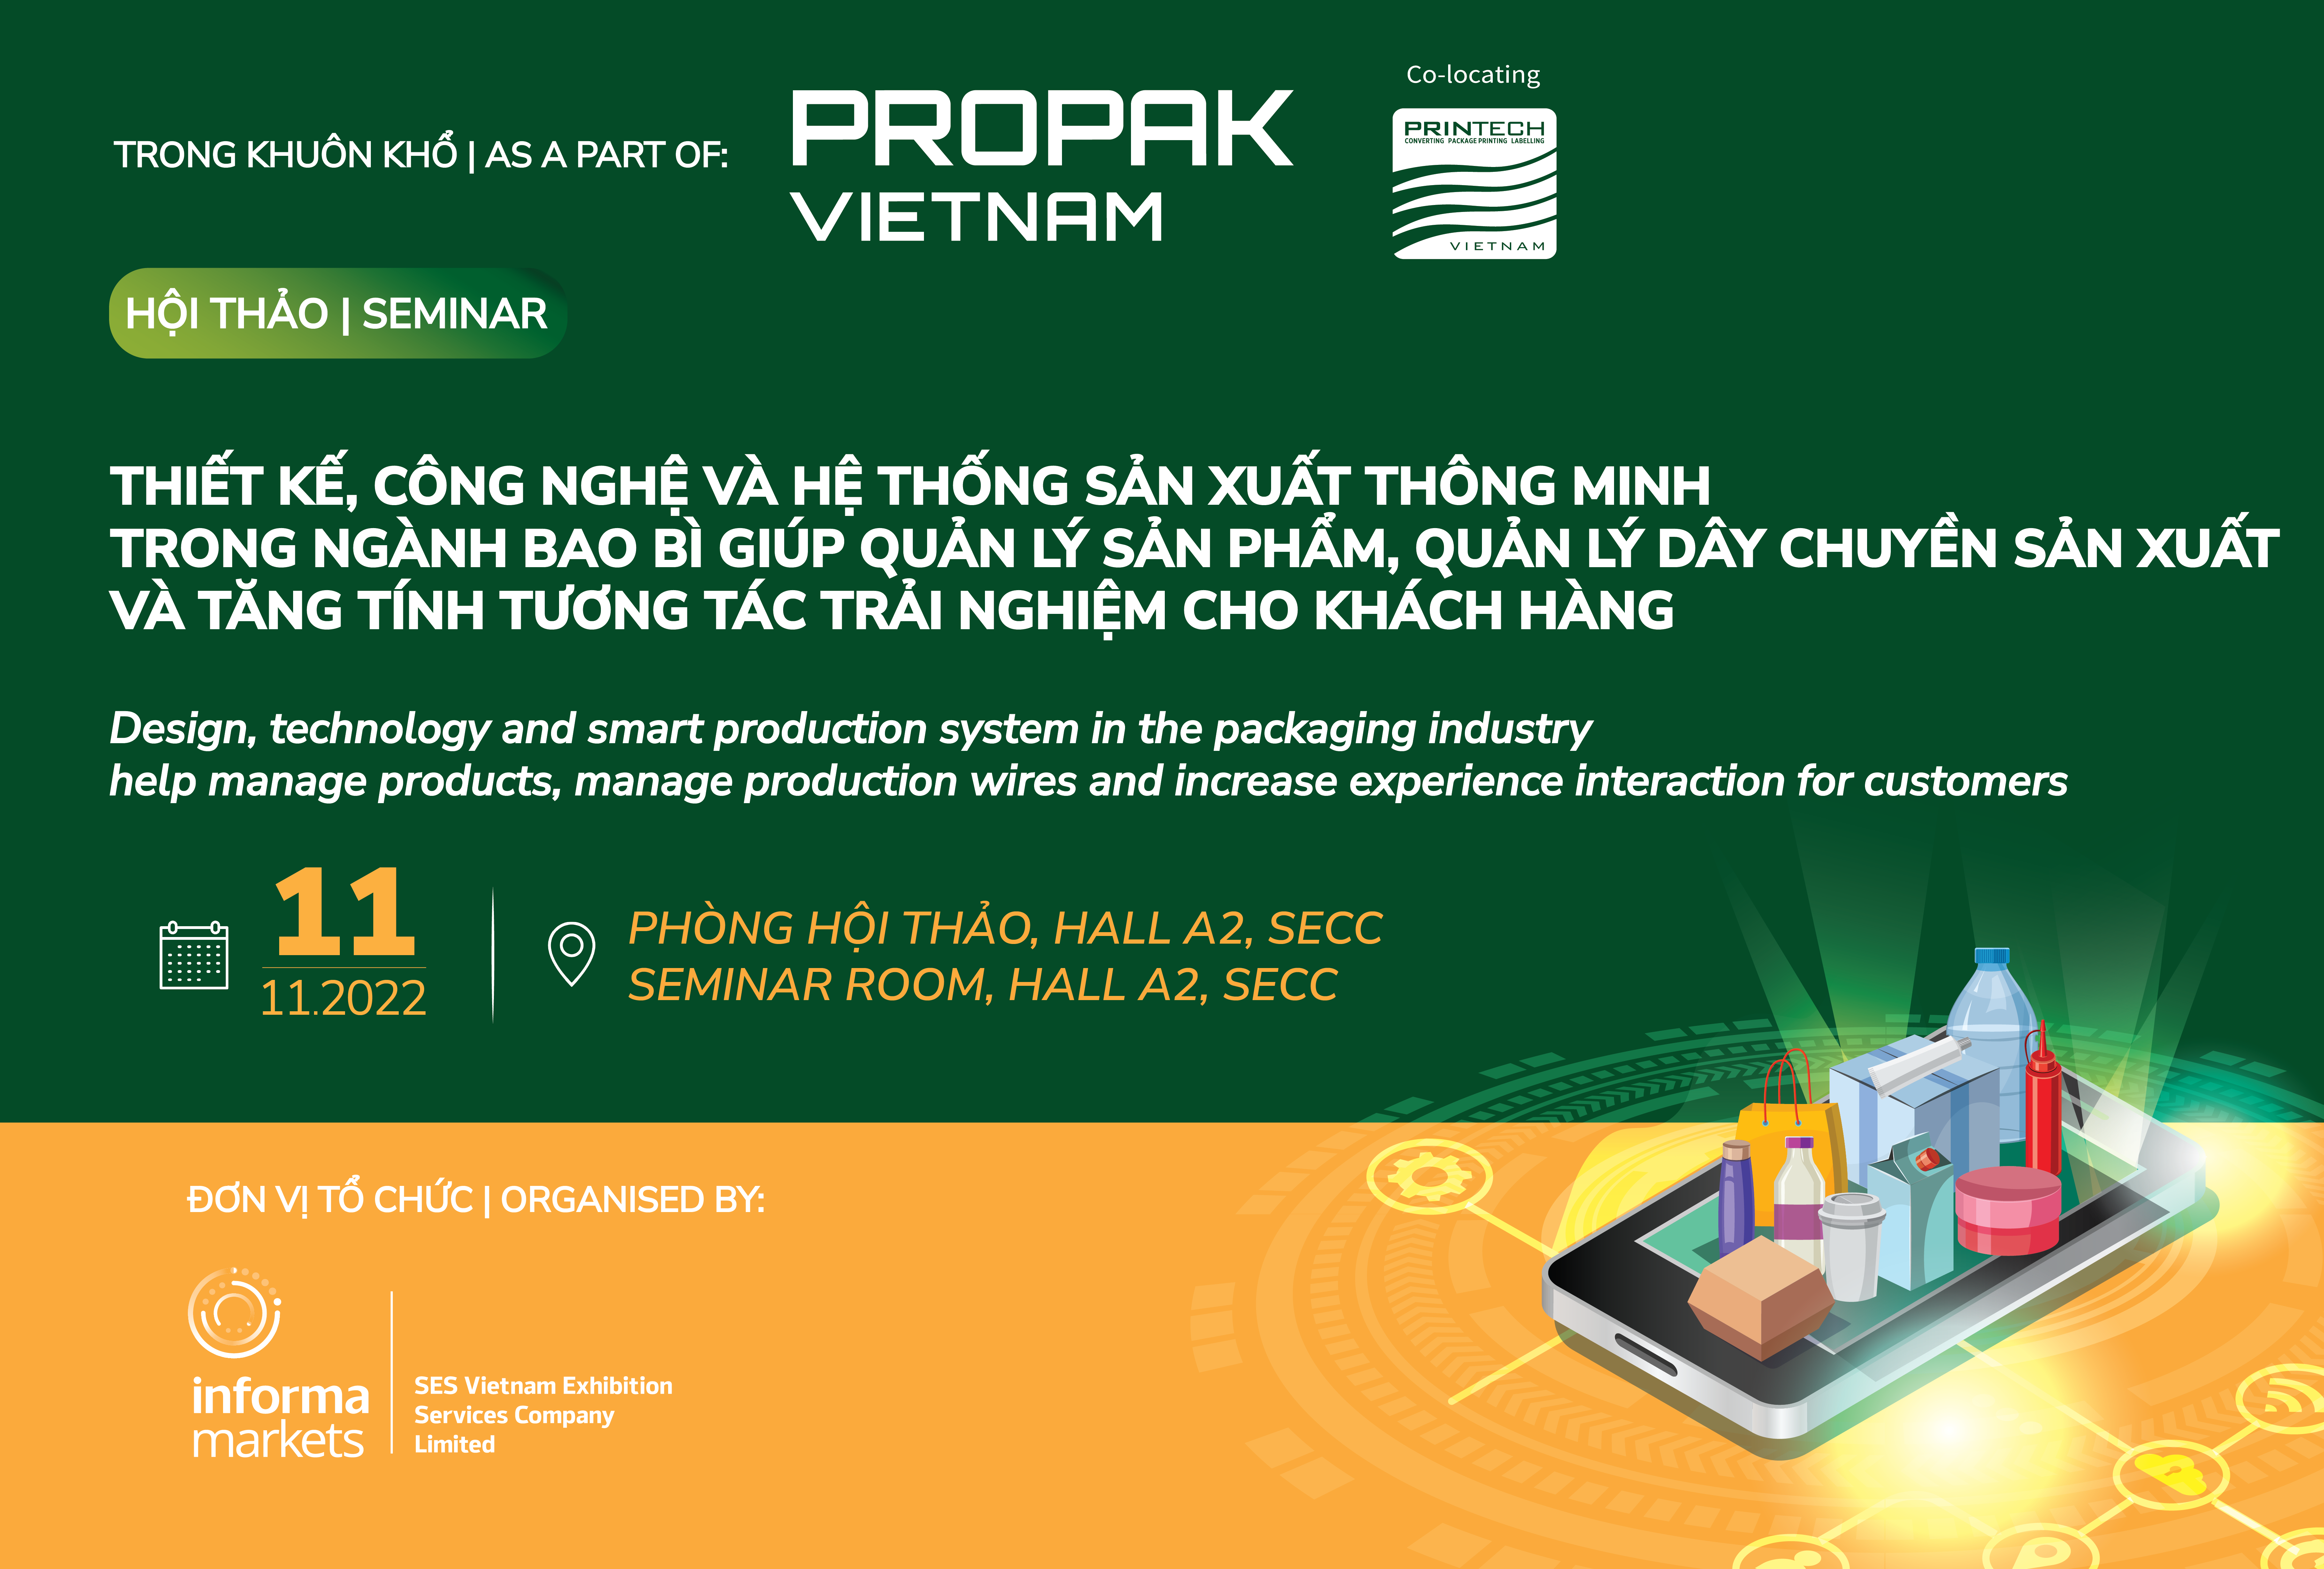 [Seminar] “Design, technology and smart production system in the packaging industry help manage products, manage production wires and increase experience interaction for customers”